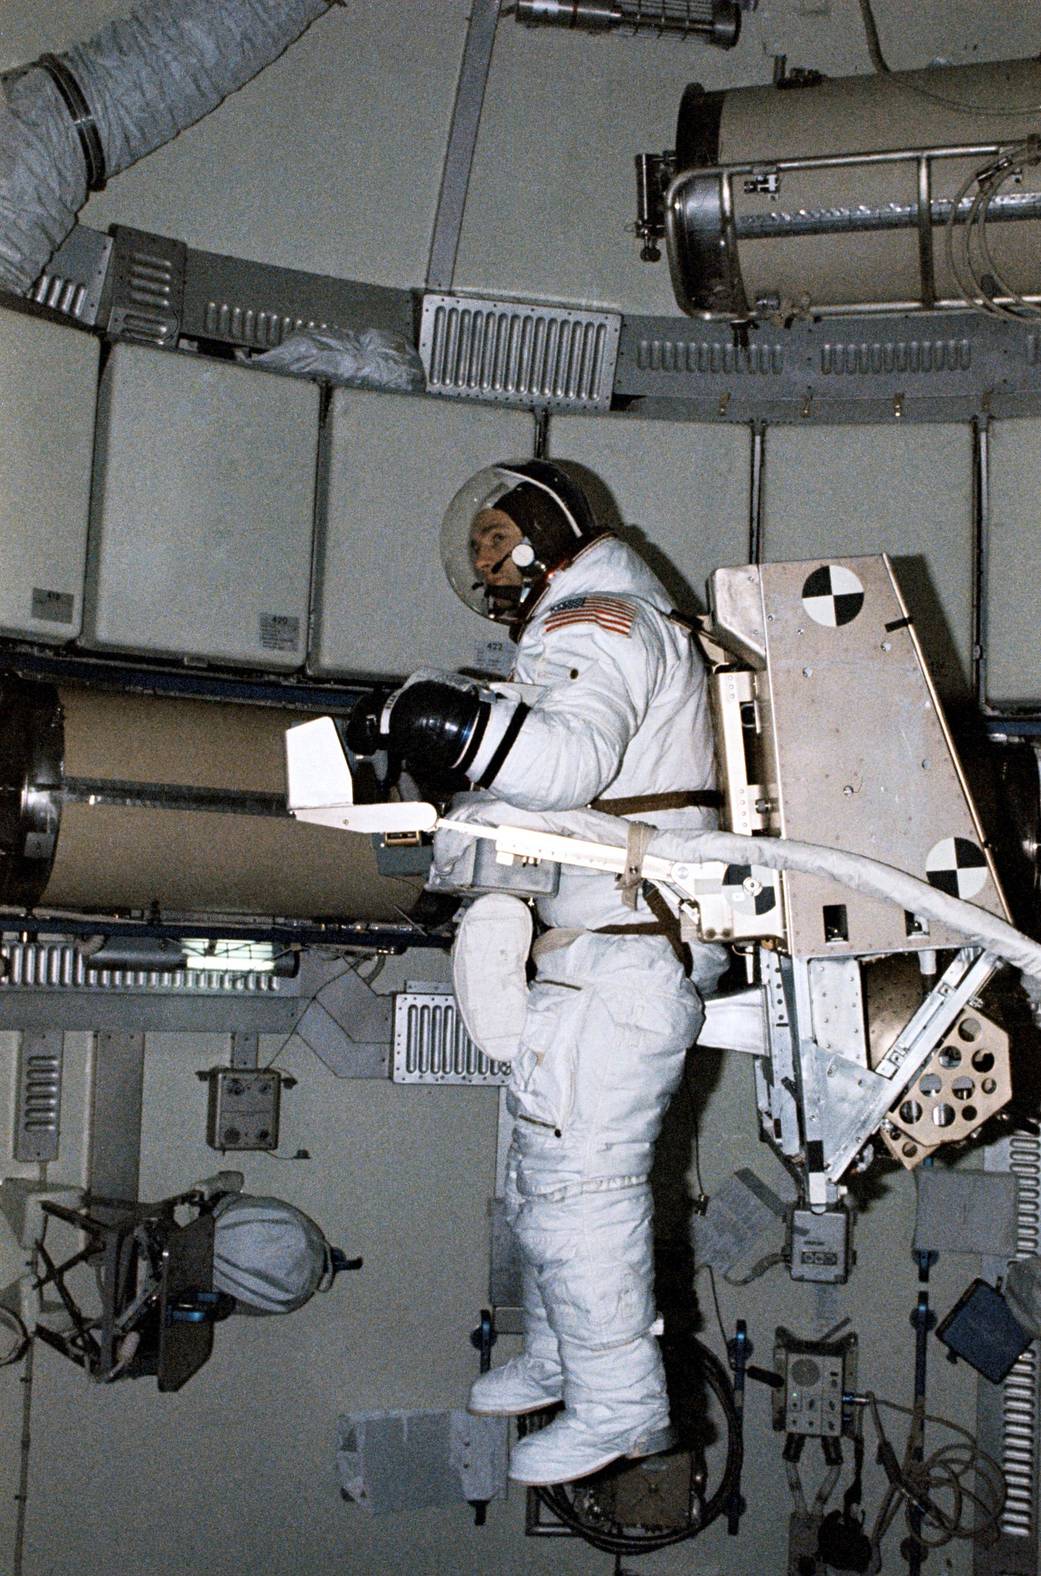 Astronaut wearing pressure suit working on experiment inside Skylab 